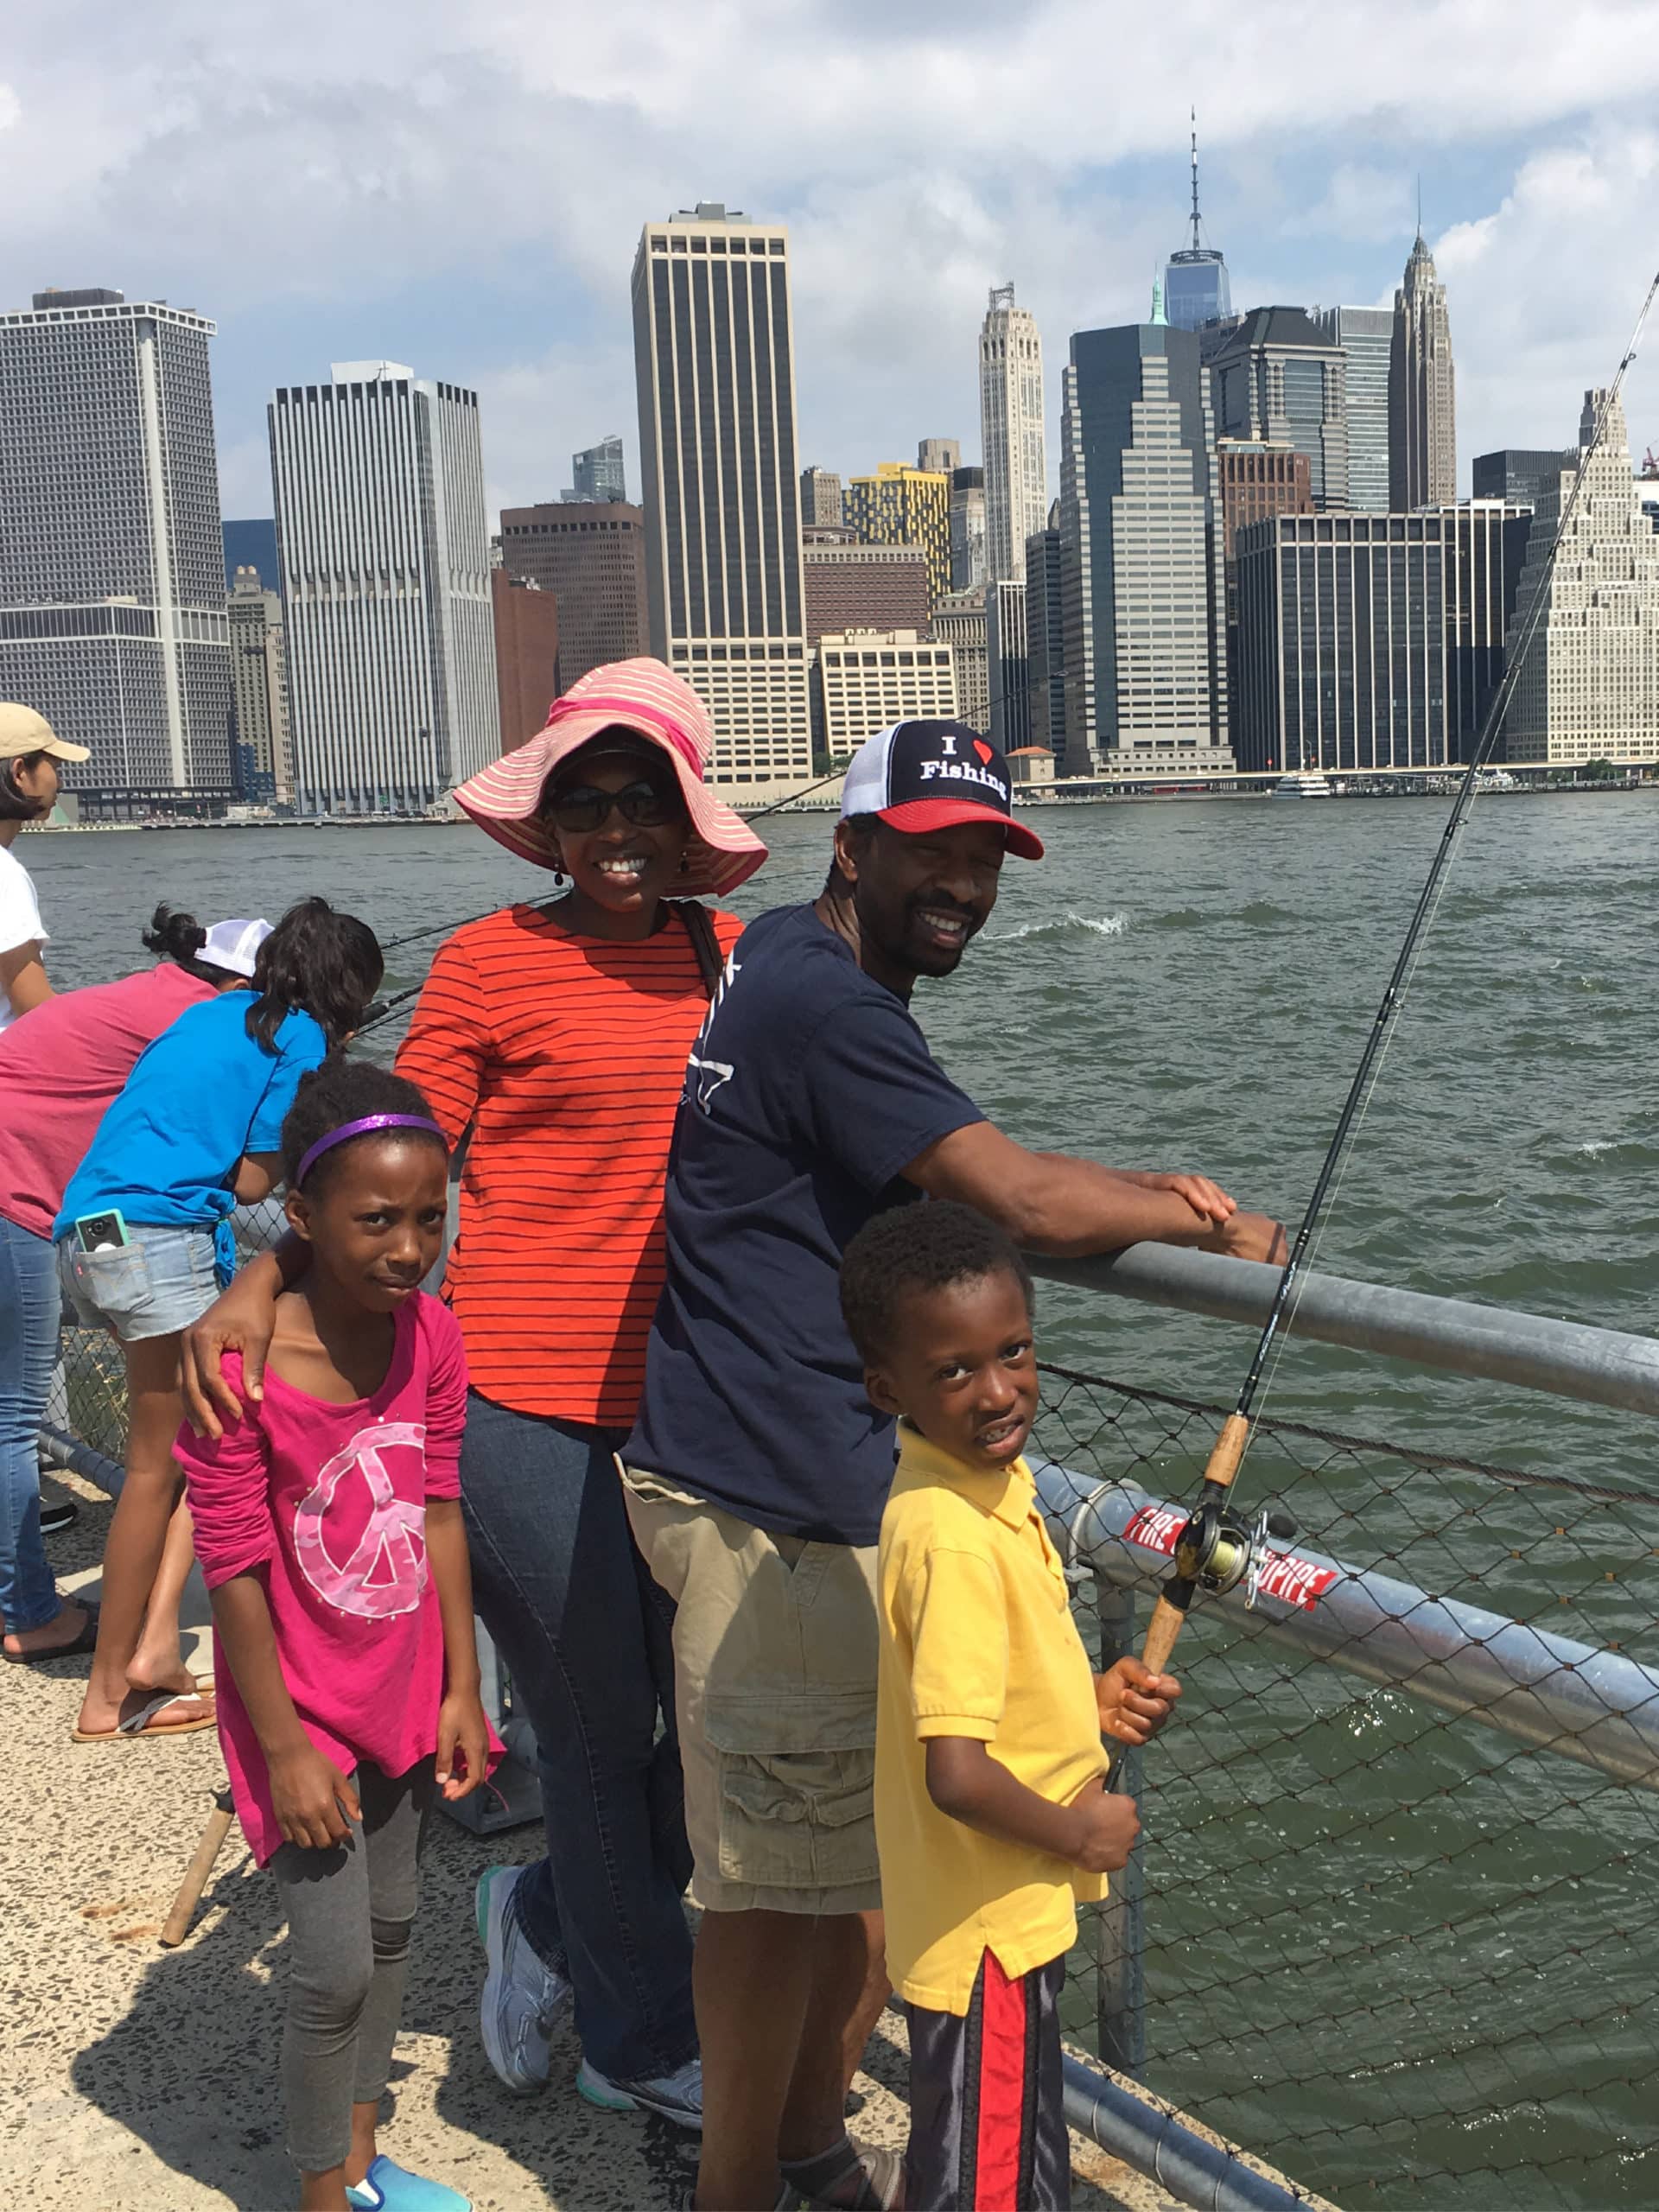 Family smiling and posing with fishing rods by the railing on the promenade.